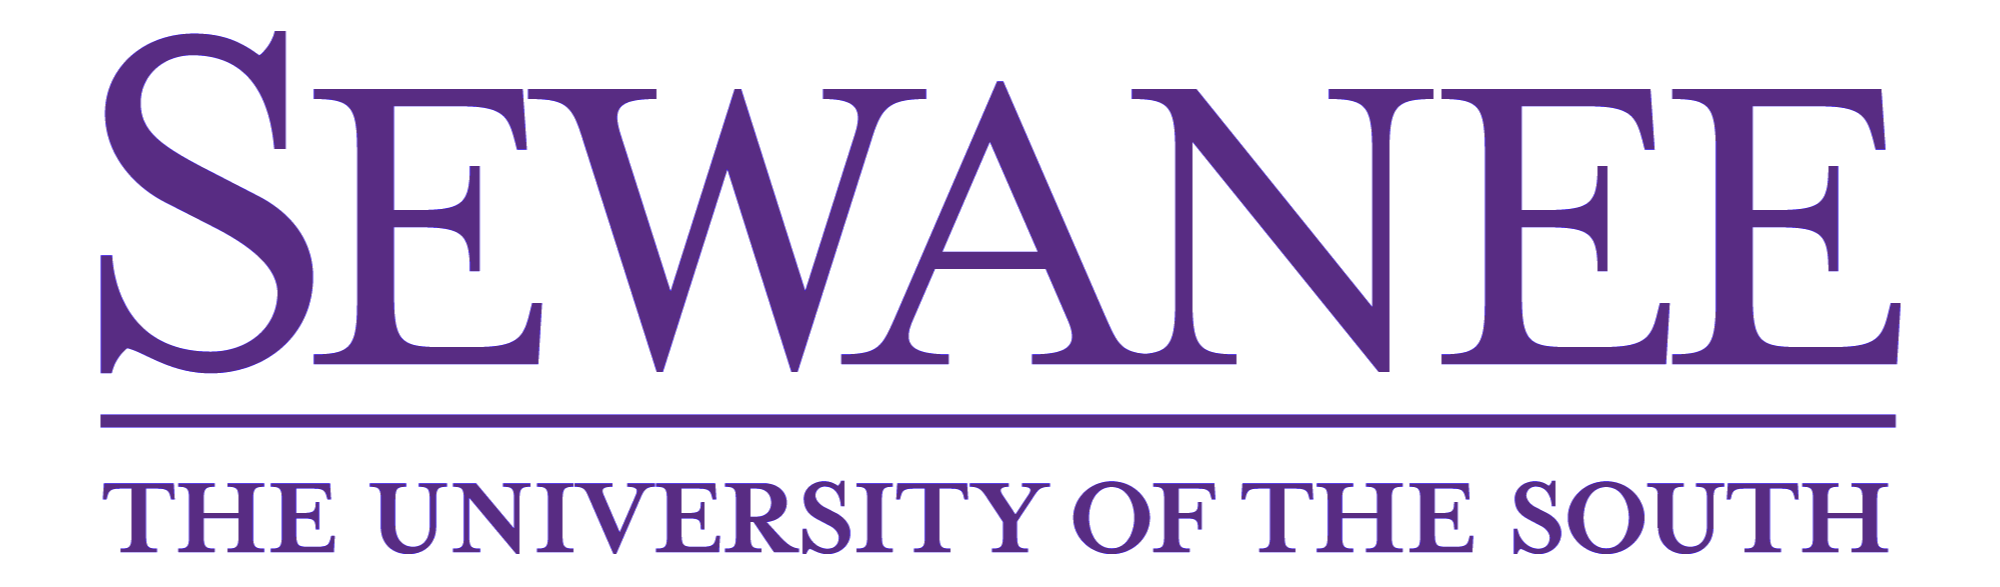 SEWANEE | The University of the South